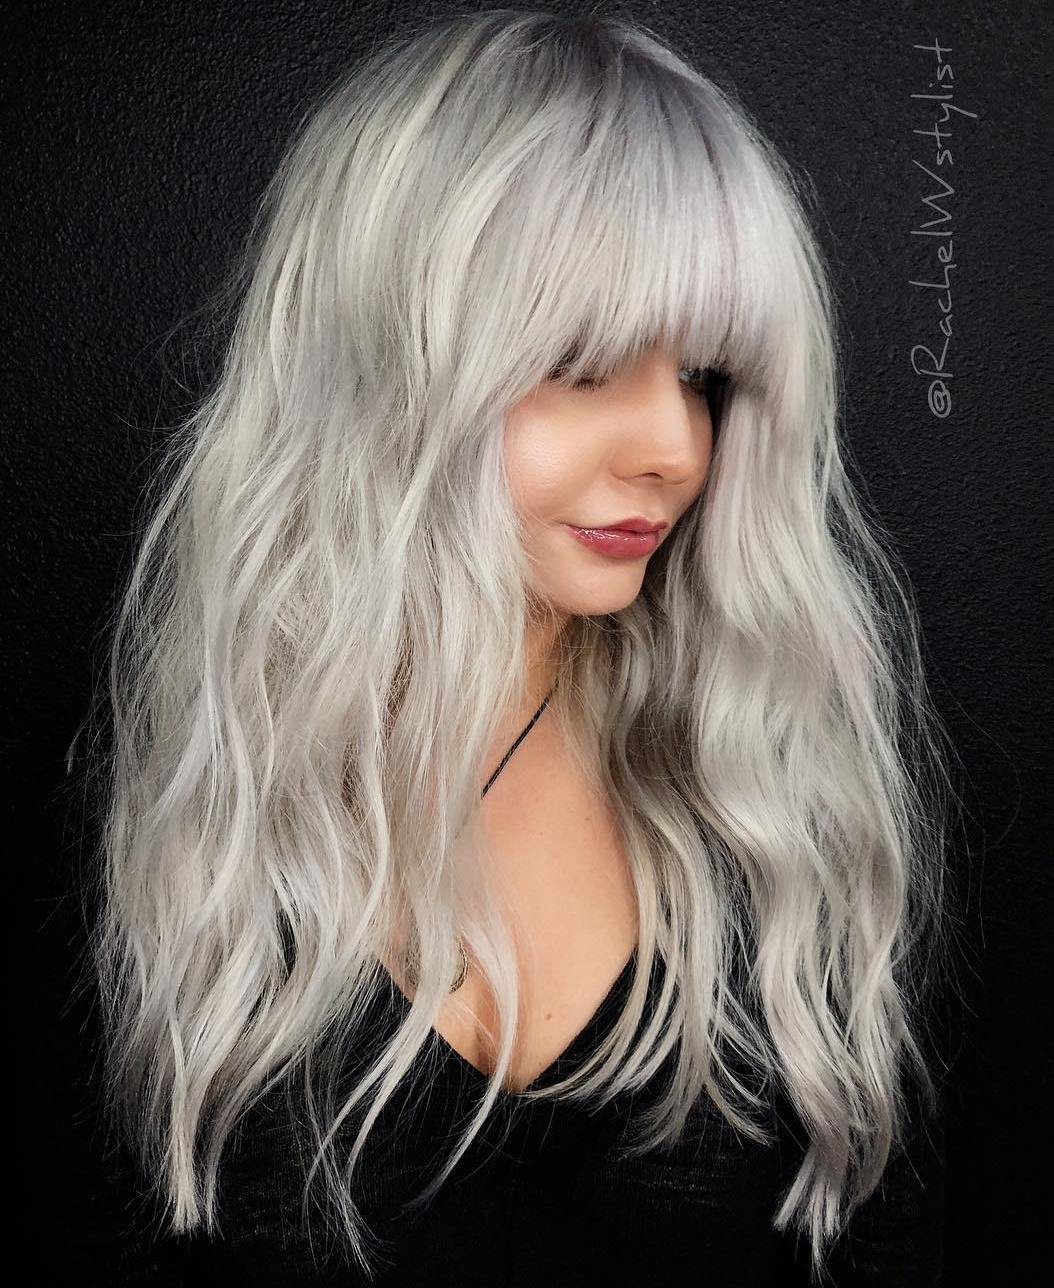 35 Instagram Popular Ways To Pull Off Long Hair With Bangs In 2020